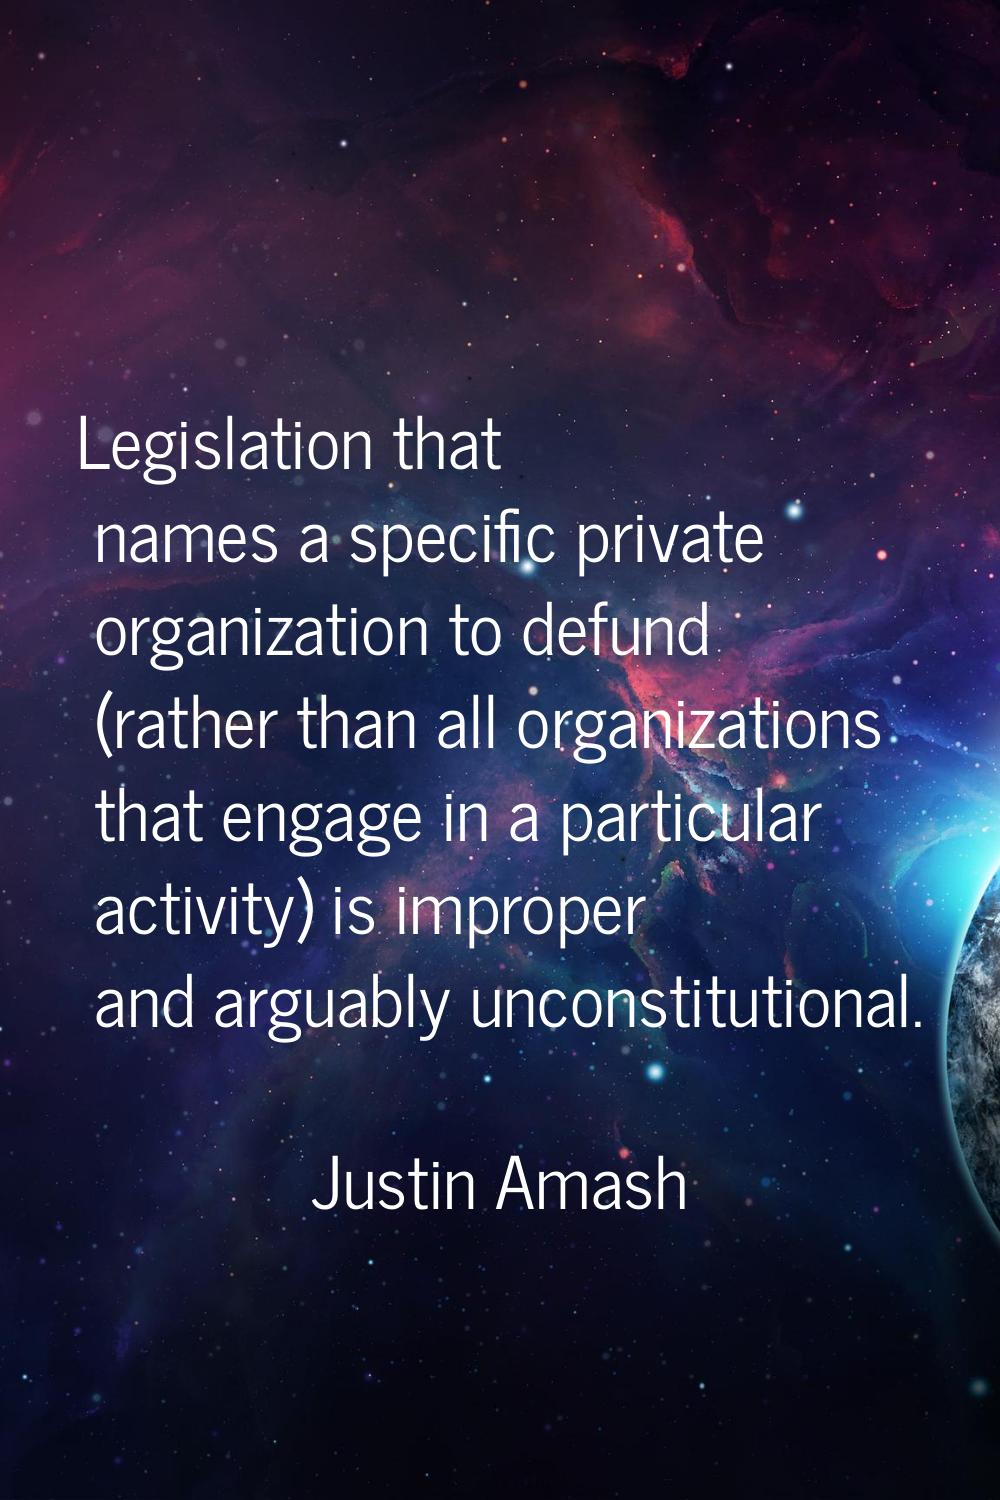 Legislation that names a specific private organization to defund (rather than all organizations tha